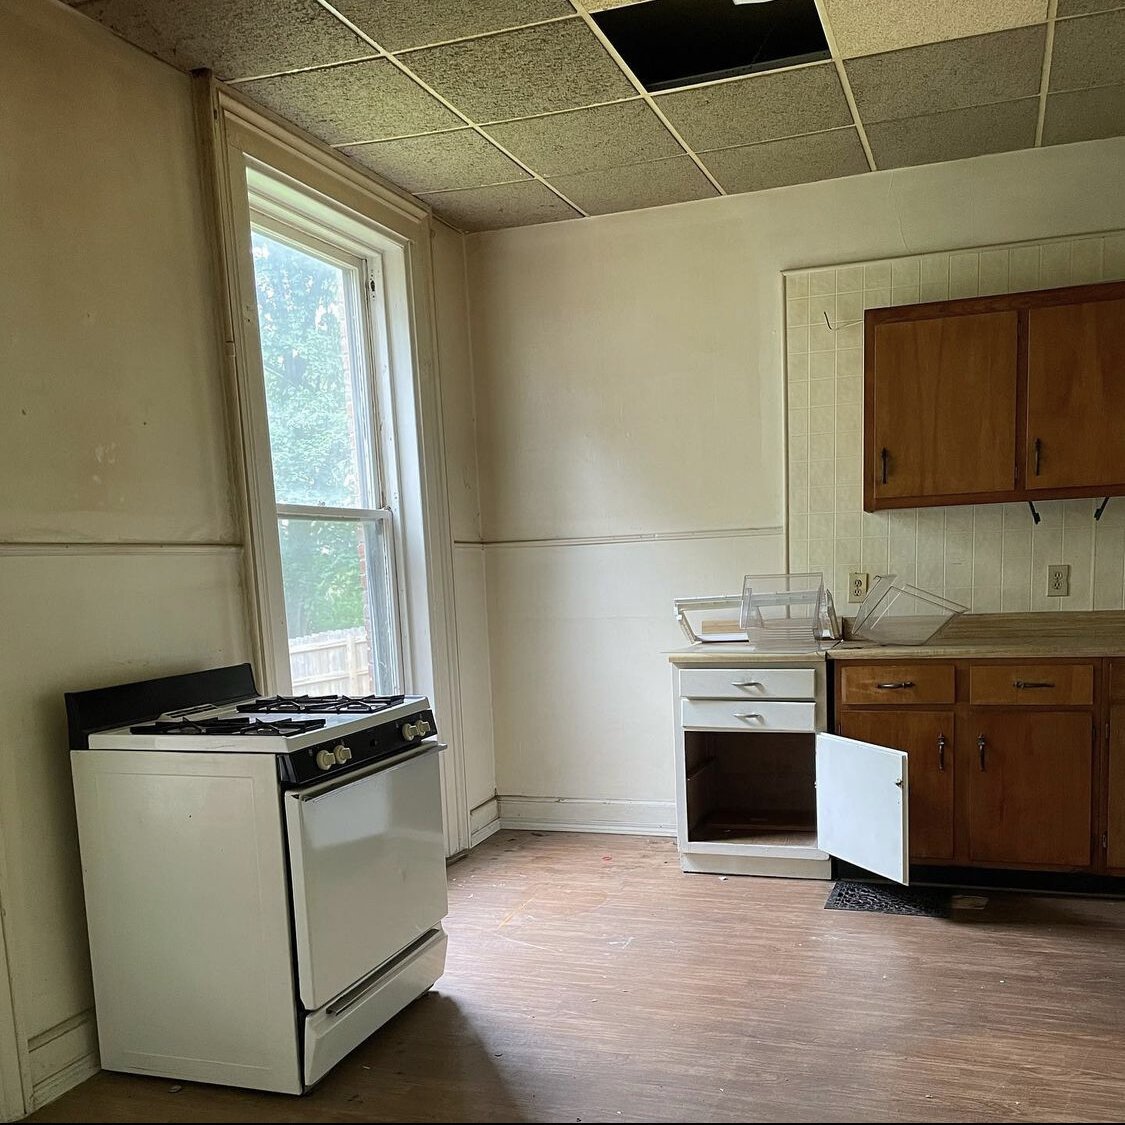 The Bain's kitchen before renovations.